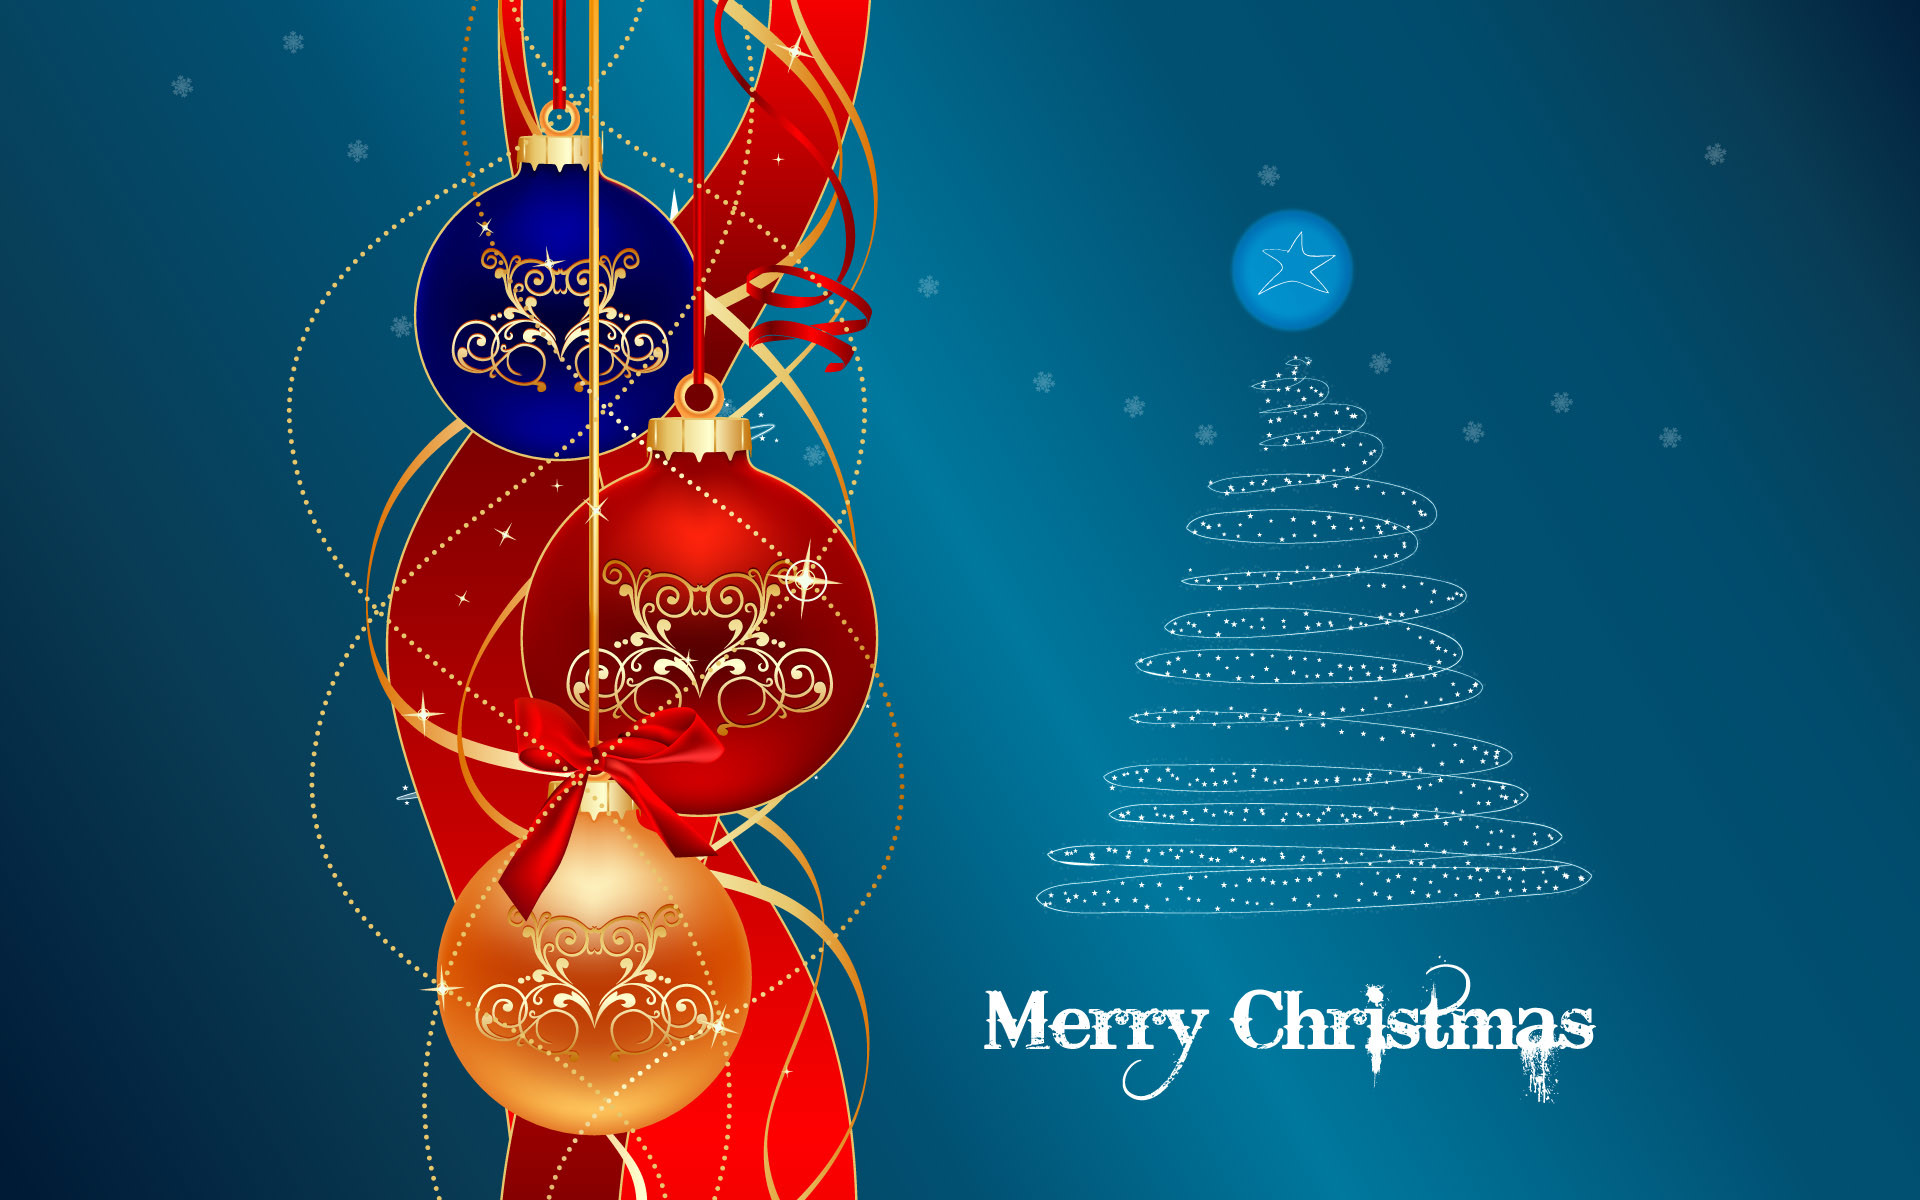 1920x1200 10 Merry Christmas Wallpapers Full HD for Desktop PC | All for Windows .